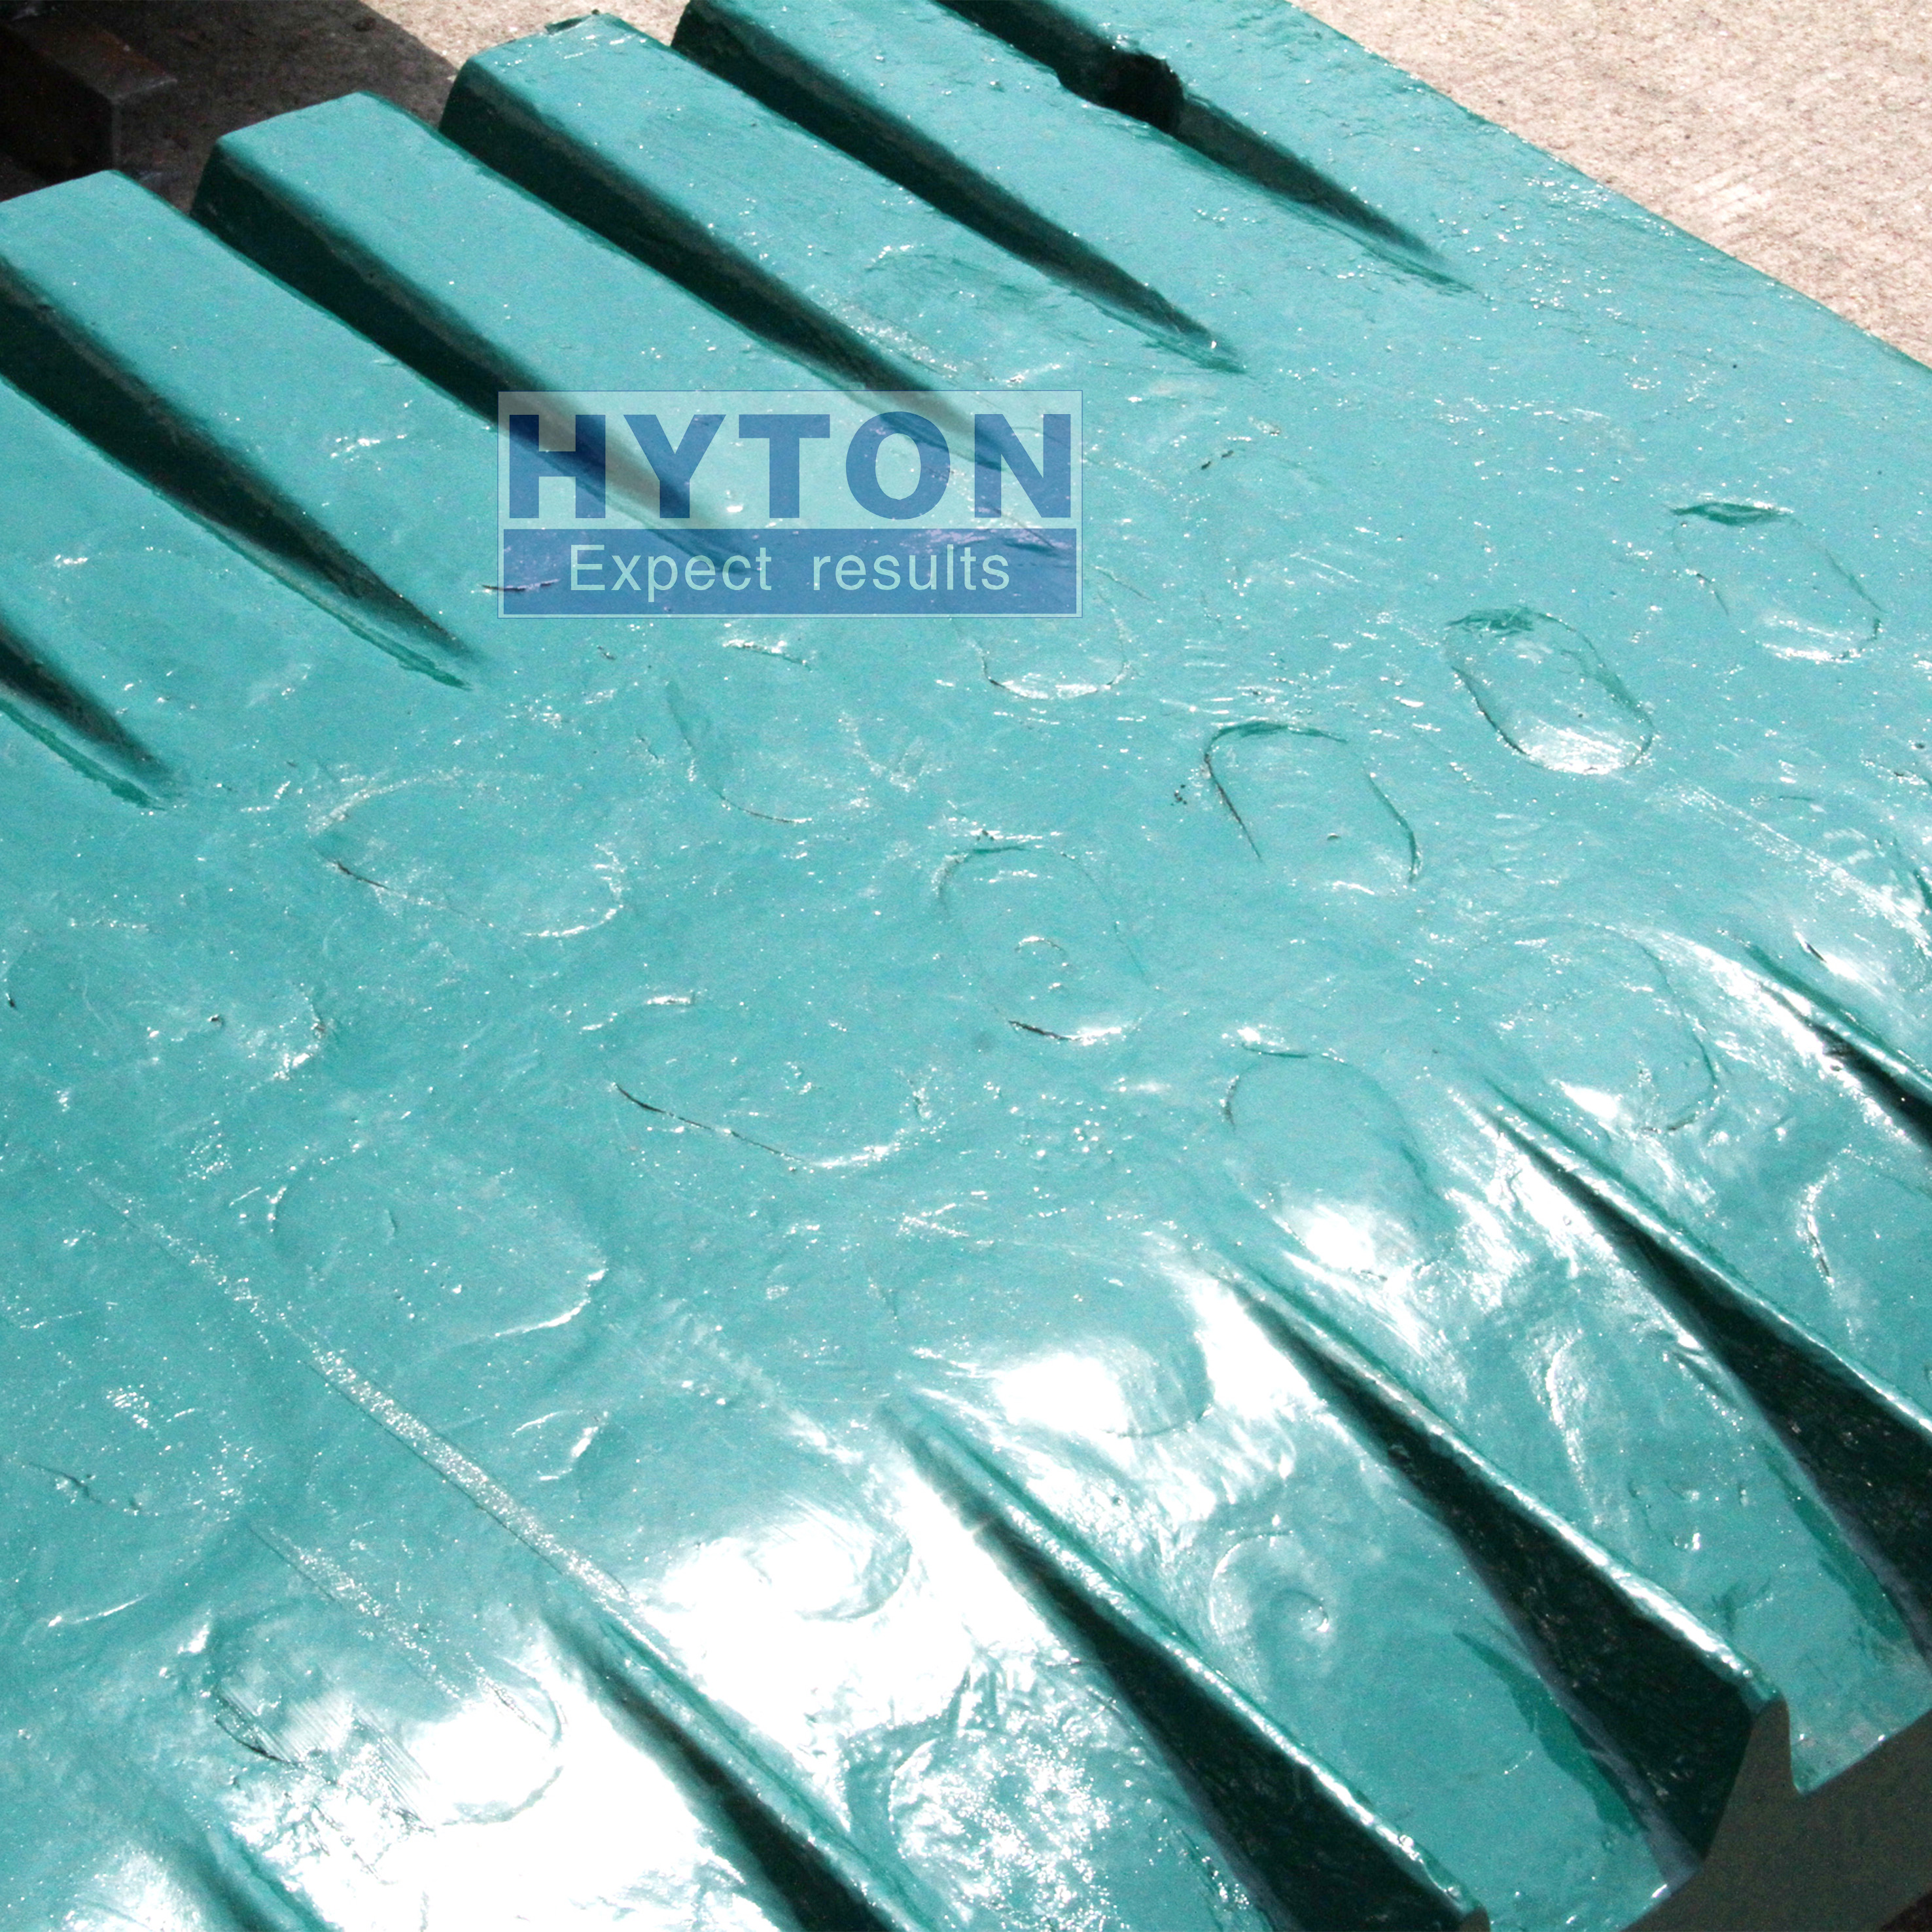 Mn18Cr2 Jaw Plate with High Chromium Alloy Insert Suit to Metso C140 Mobile Jaw Crusher Wear Parts